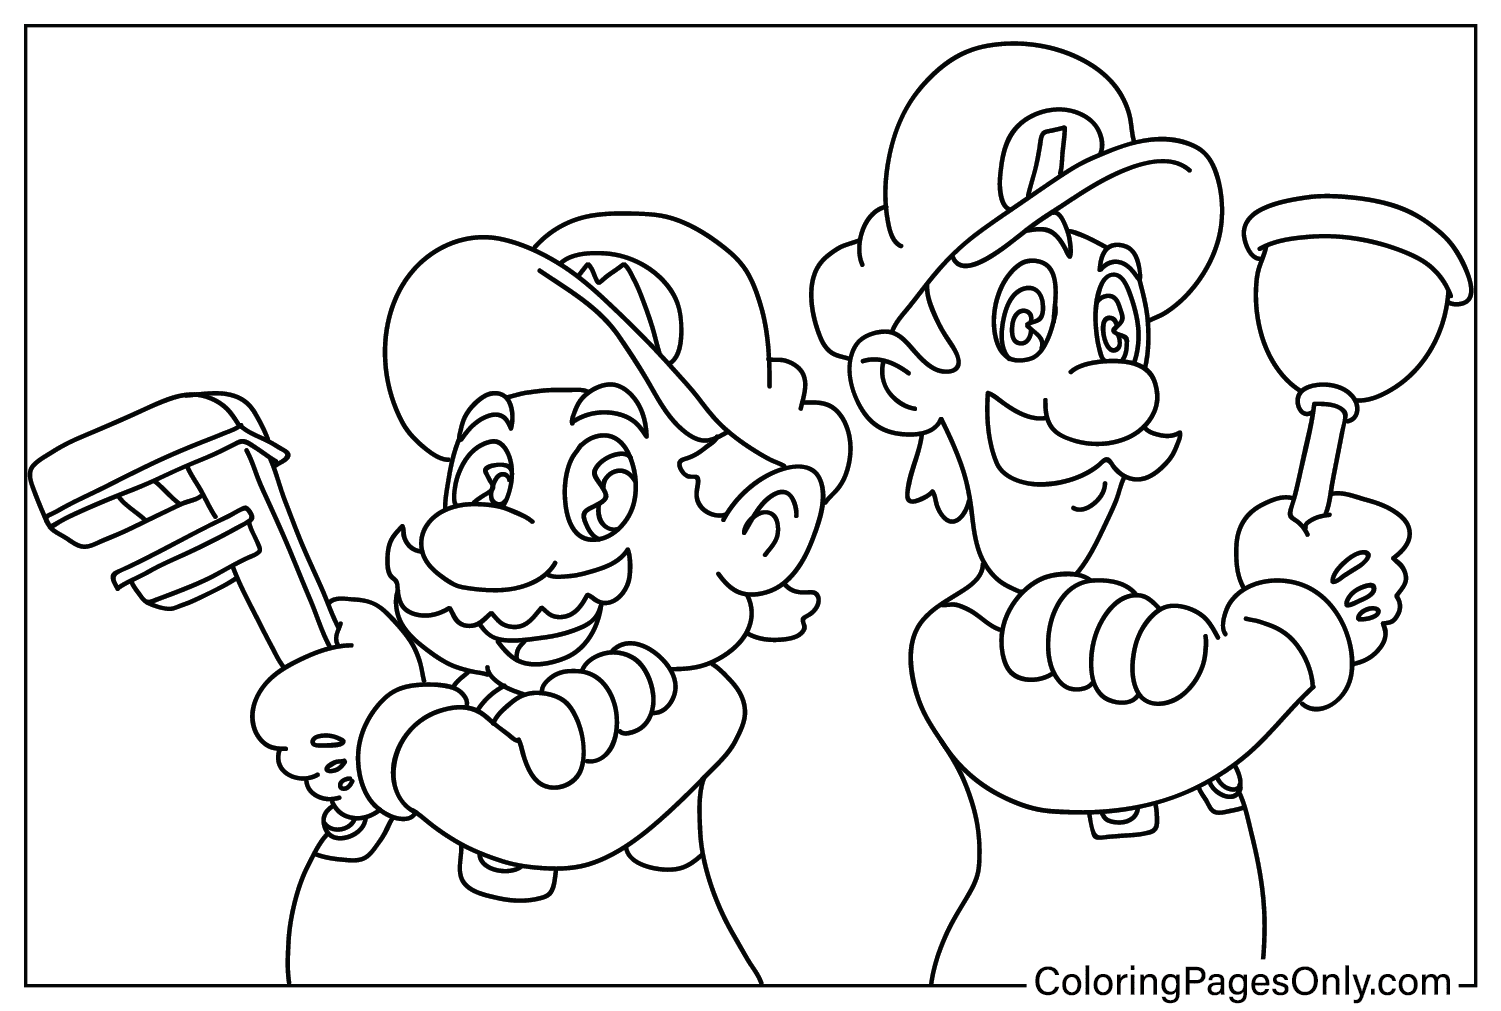 Super Mario Bros. Movie Images to Color - Free Printable Coloring Pages